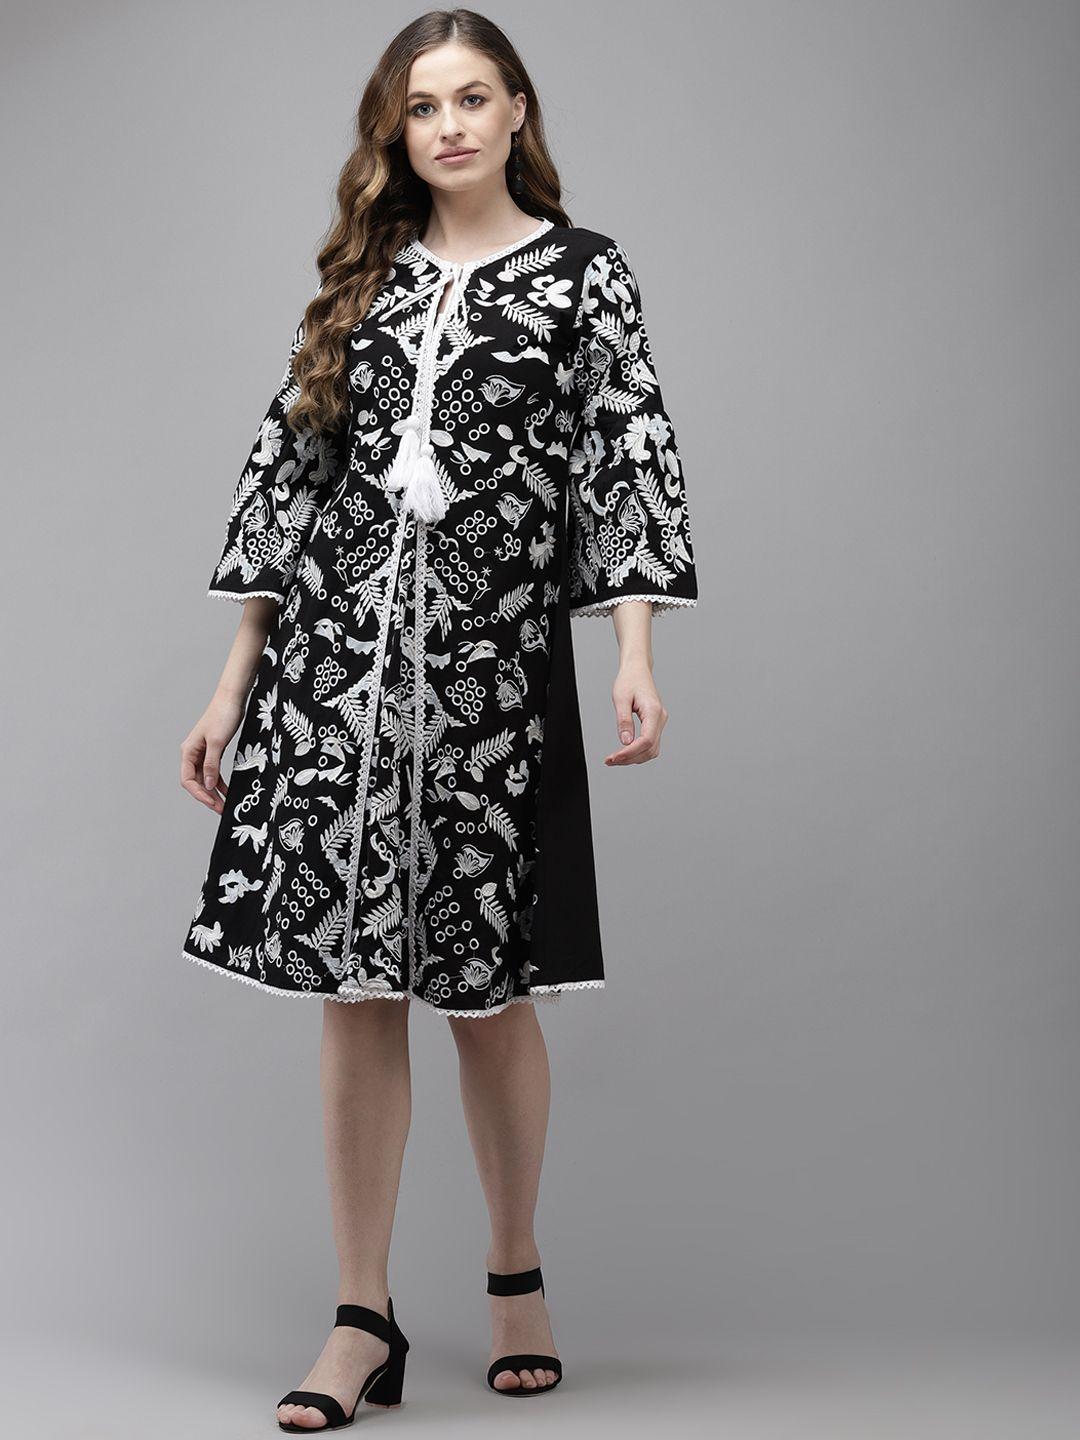 ishin black & white floral embroidered tie-up neck a-line dress